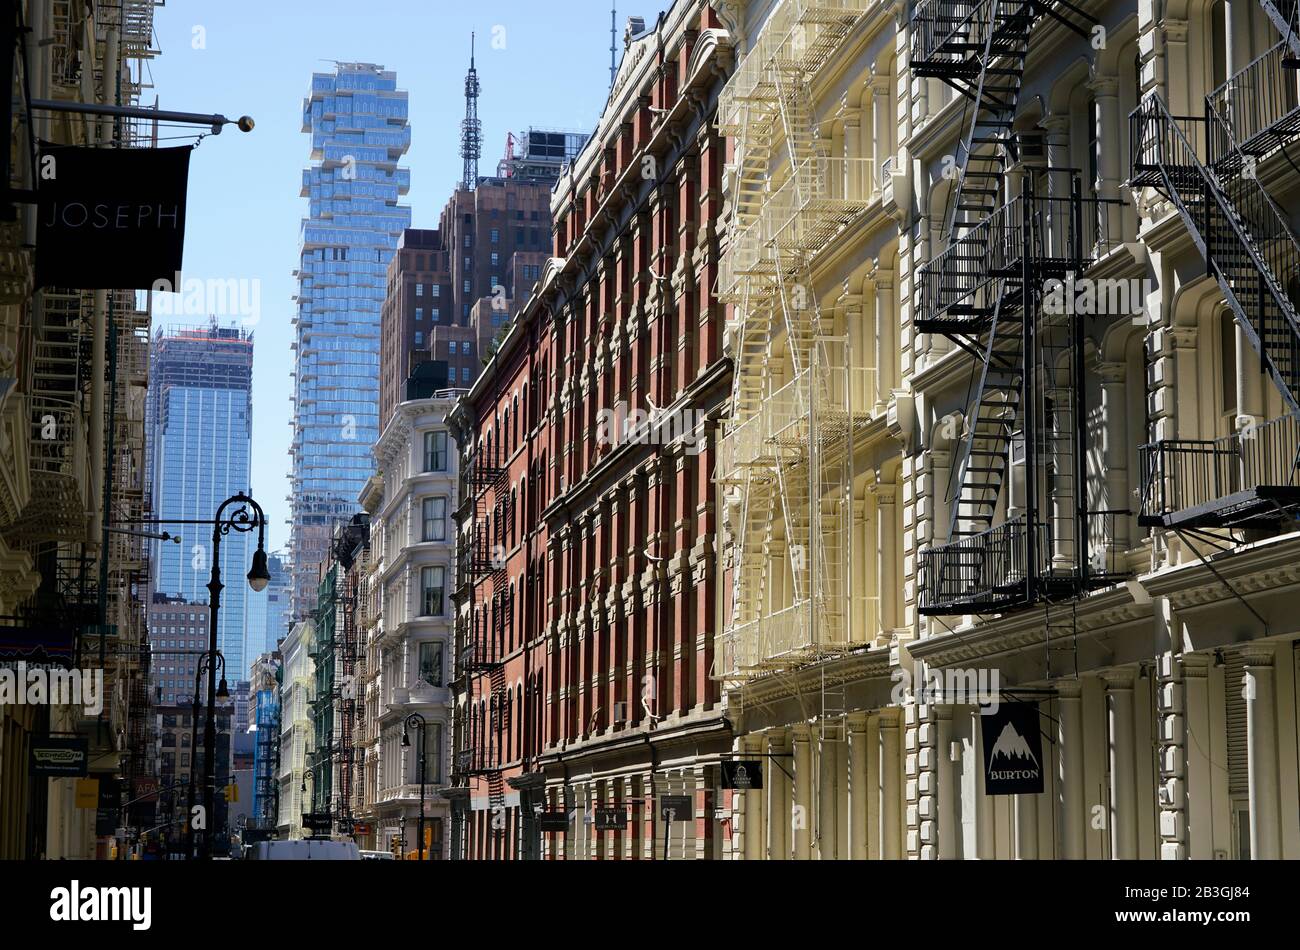 Historic cast-iron buildings in SoHo neighborhood with luxury high-rise 56 Leonard Street in Tribeca in the background.Lower Manhattan.New York City.USA Stock Photo